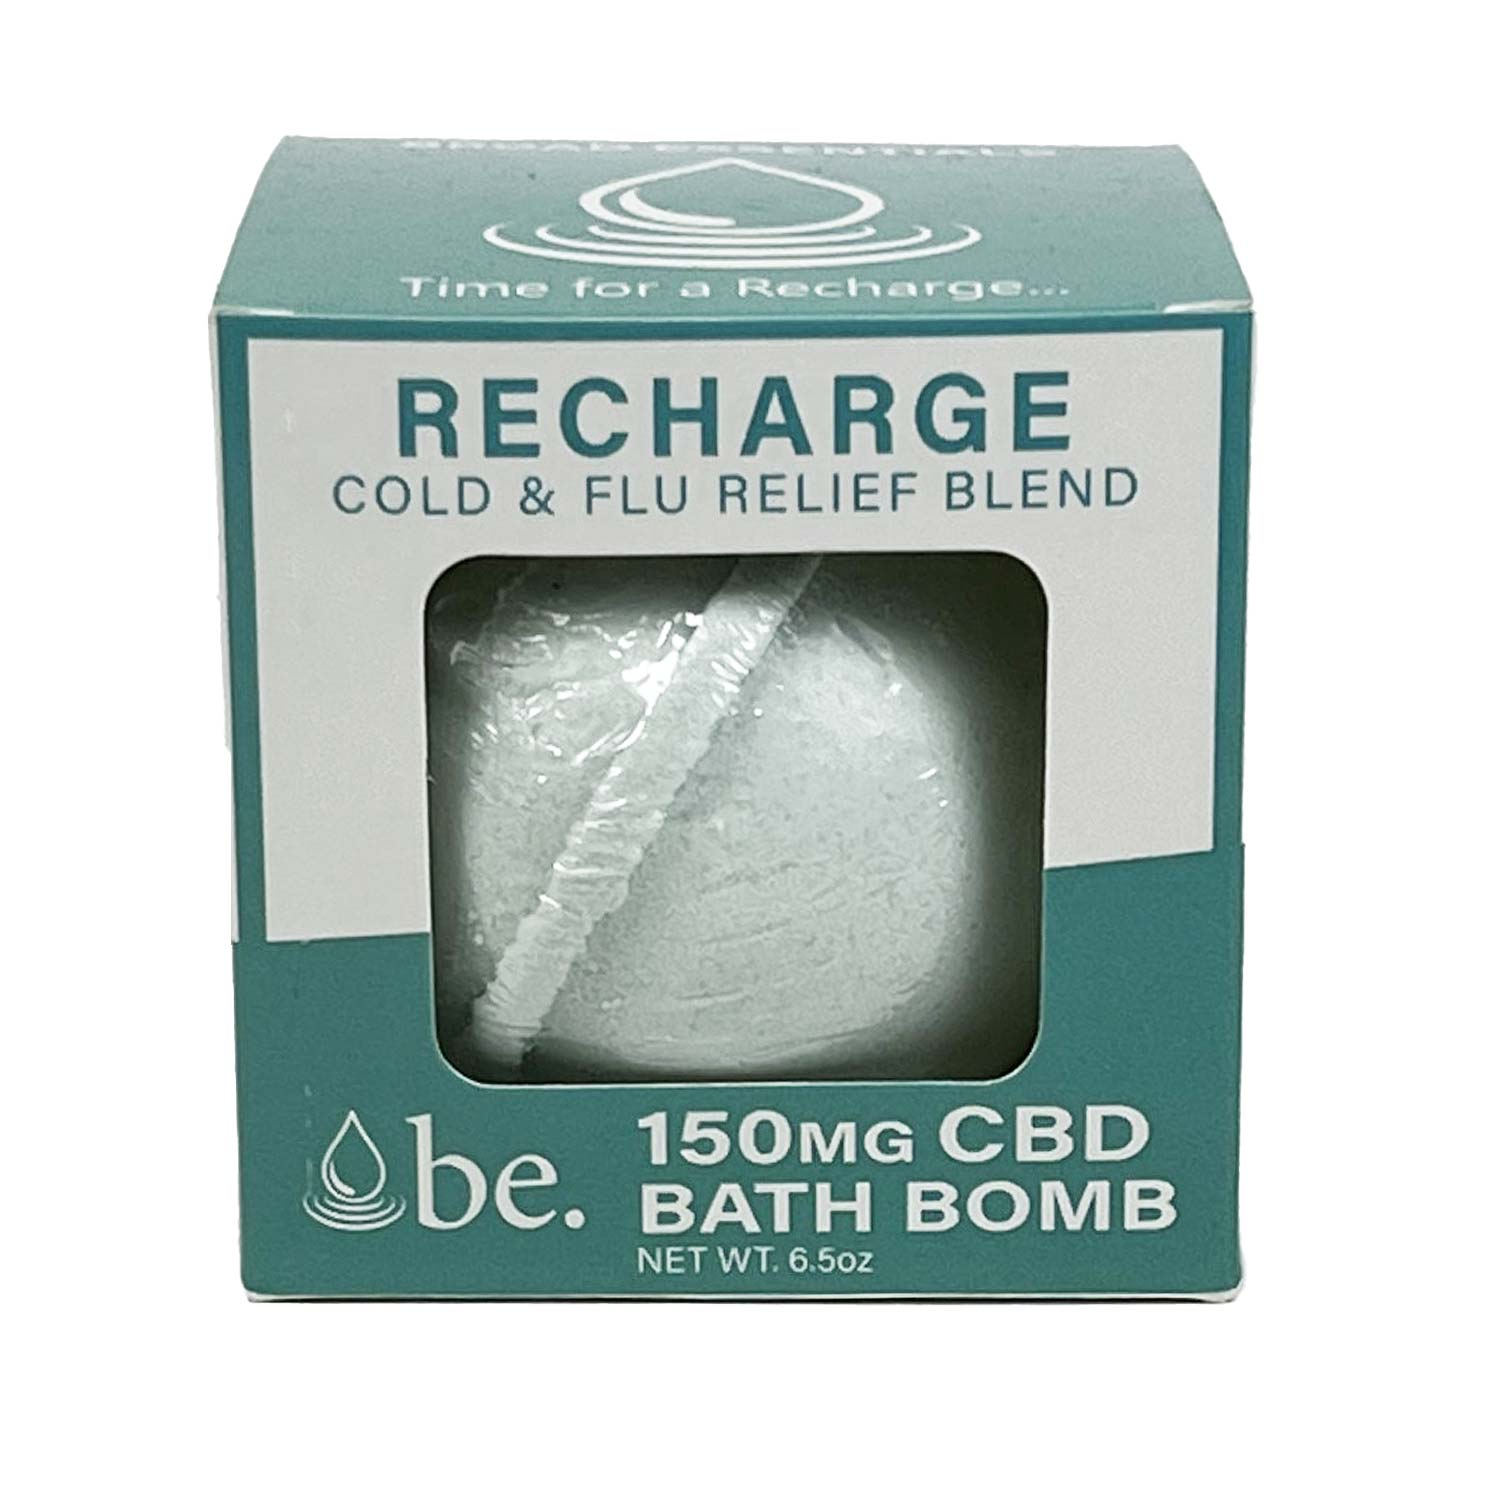 Recharge CBD Bath Bombs by Broad Essentials | 150mg Broad Spectrum CBD - for Energy, fatigue, brain fog and relieving cold and flu symptoms.